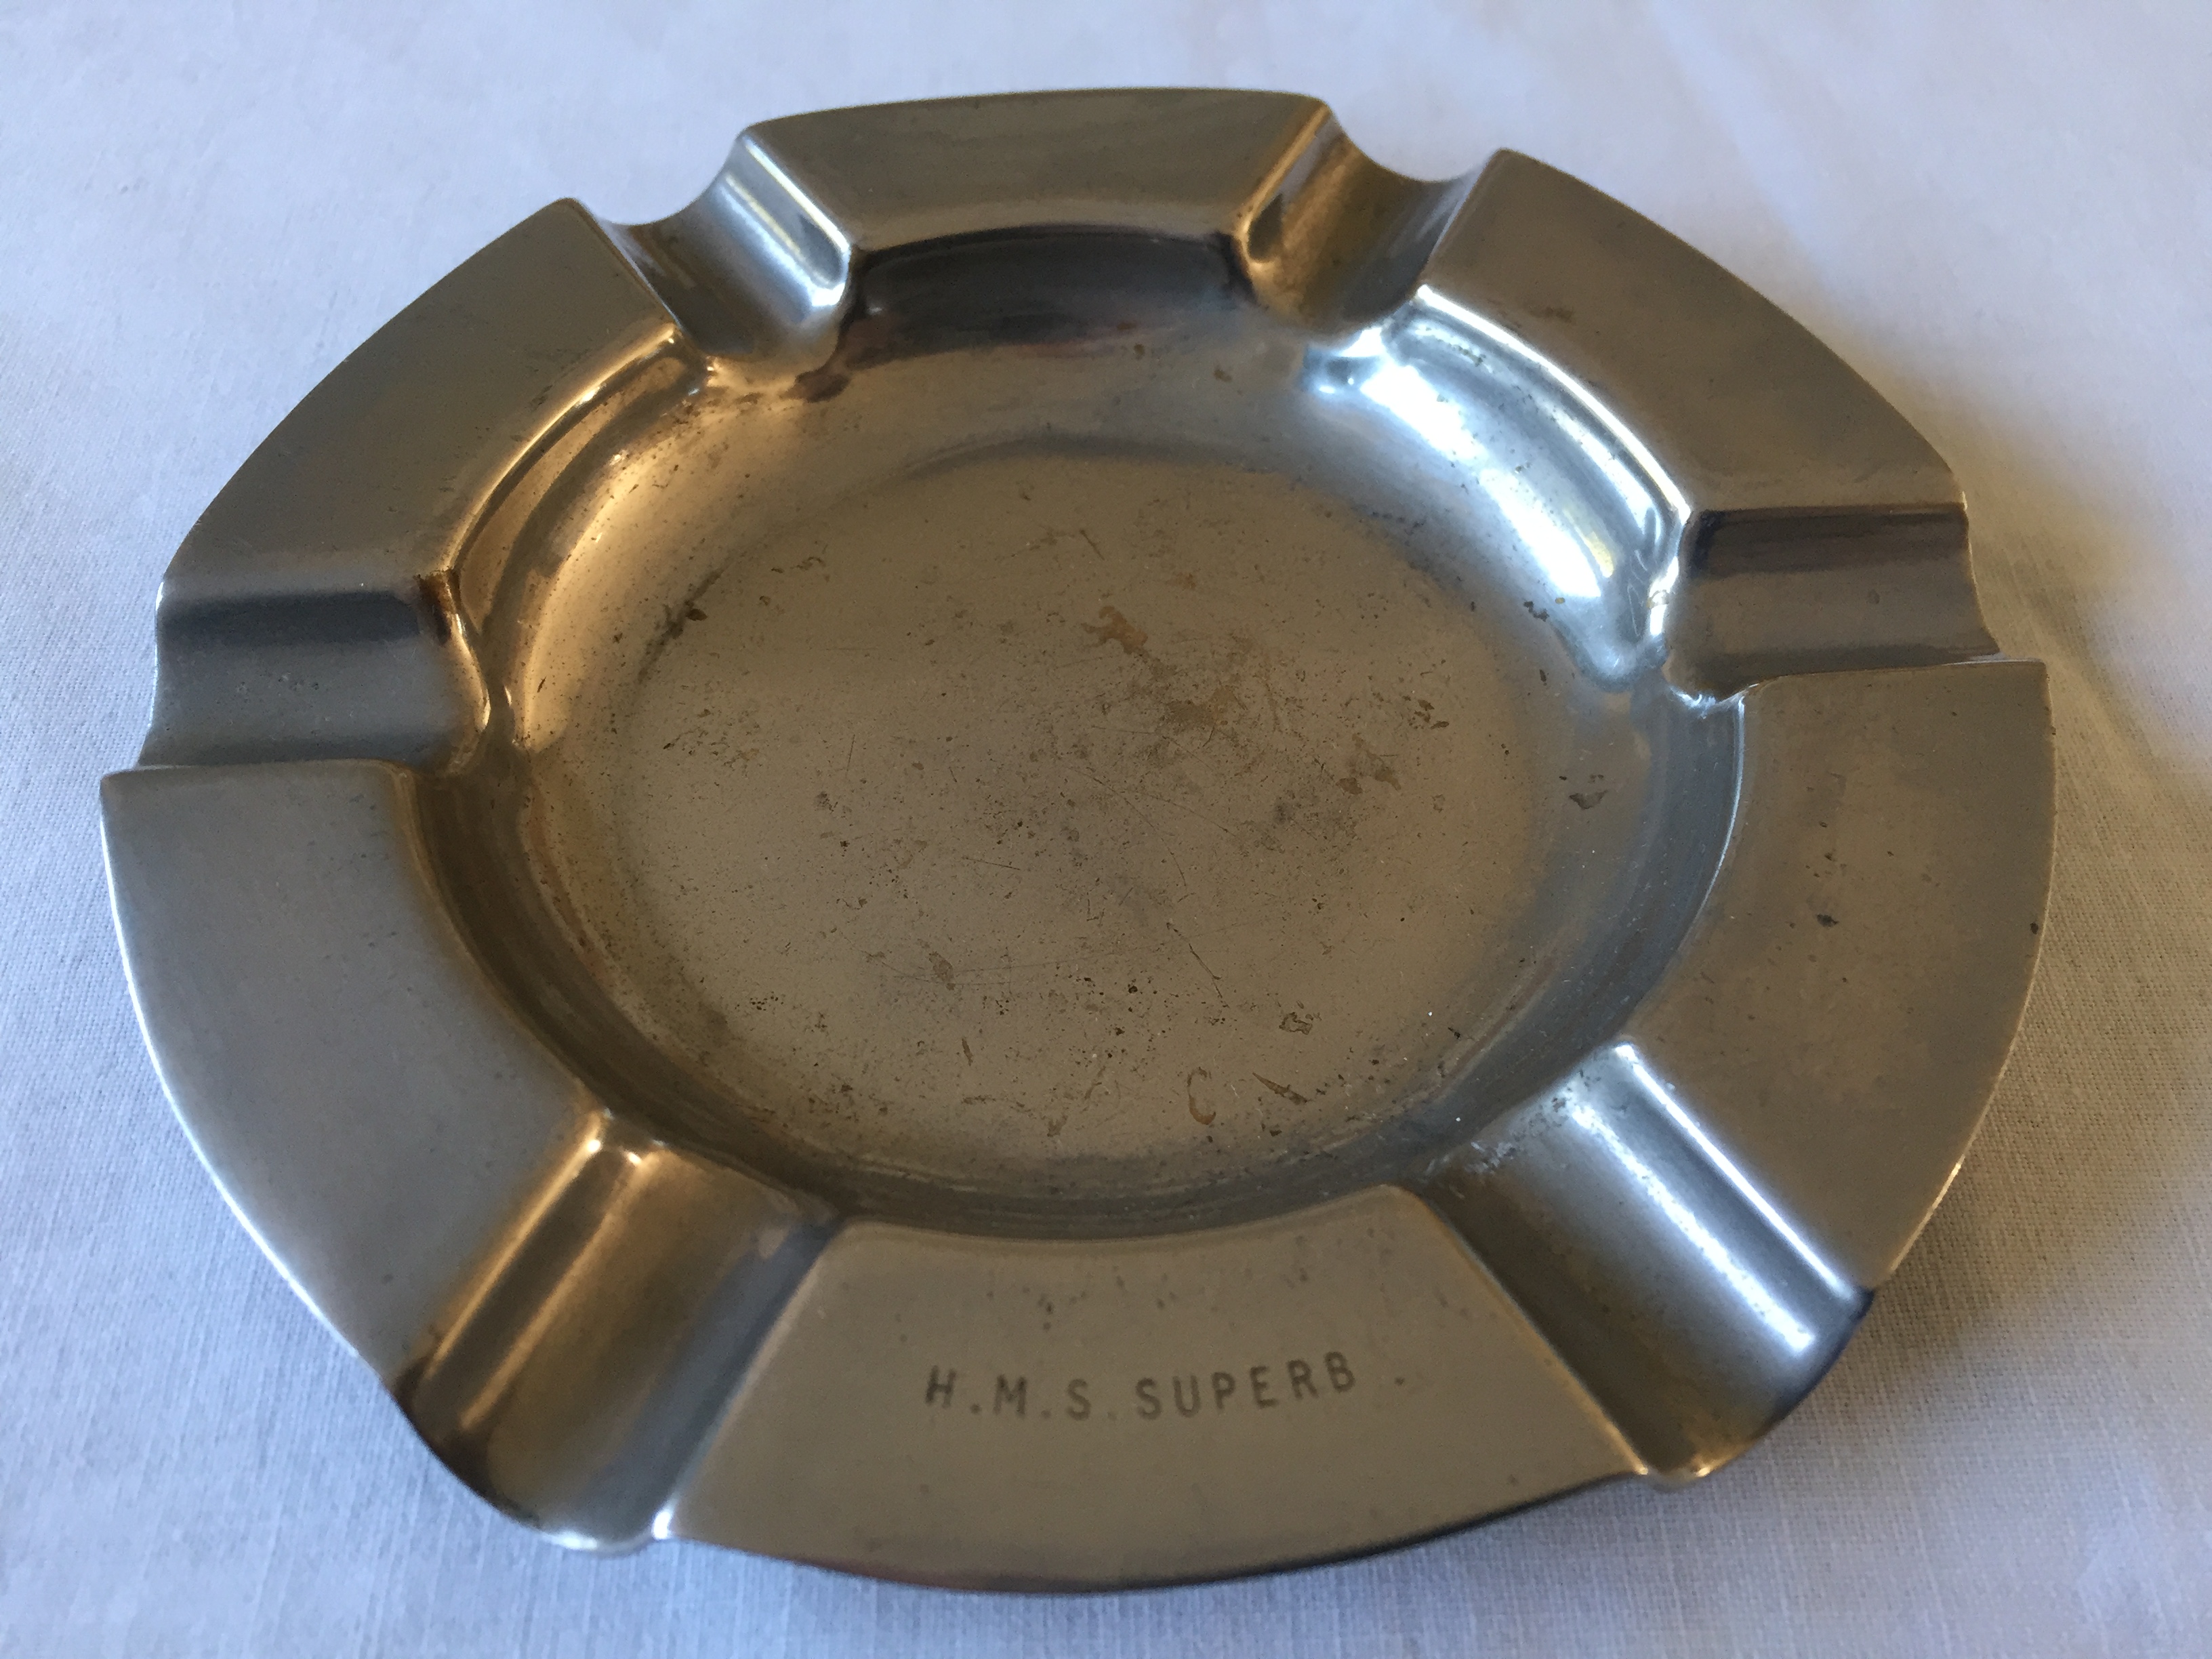 SILVER COLOURED ASHTRAY FROM THE NAVAL VESSEL THE HMS SUPERB